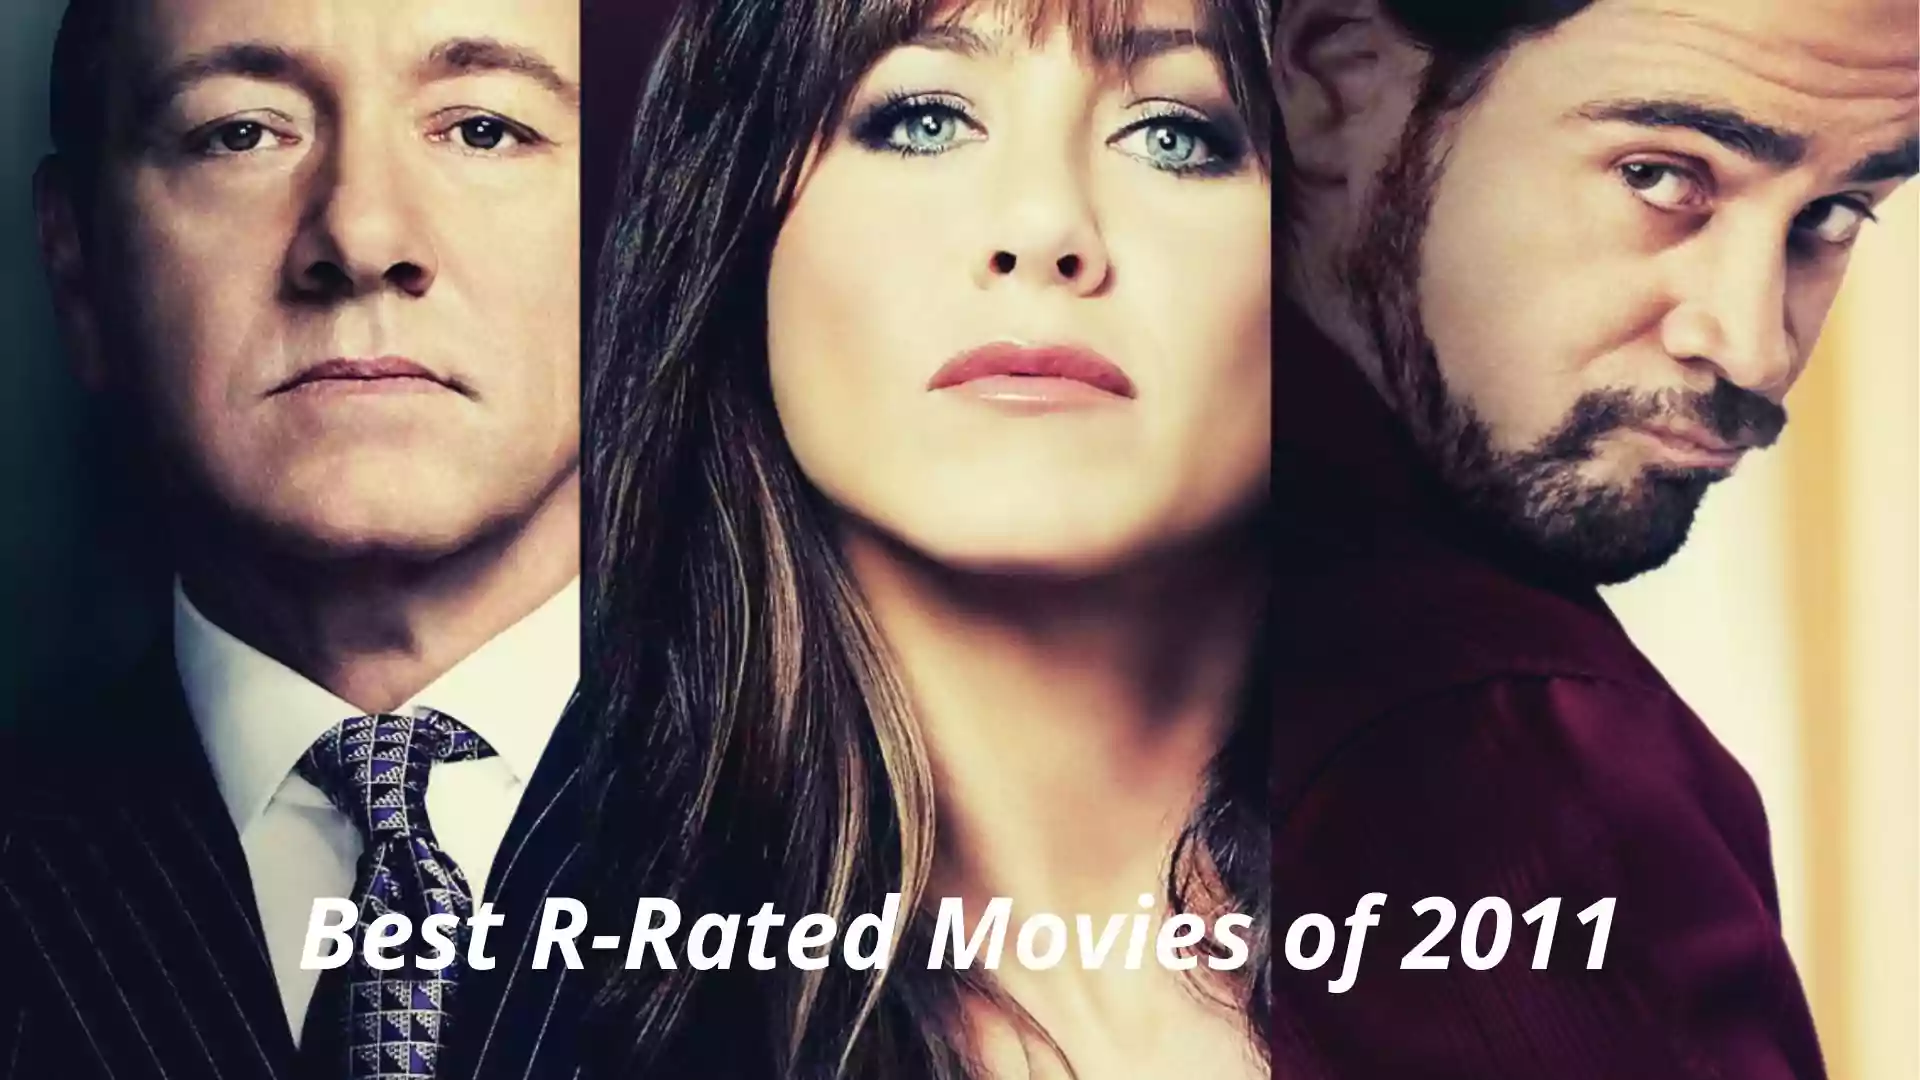 Best R-Rated Movies of 2011